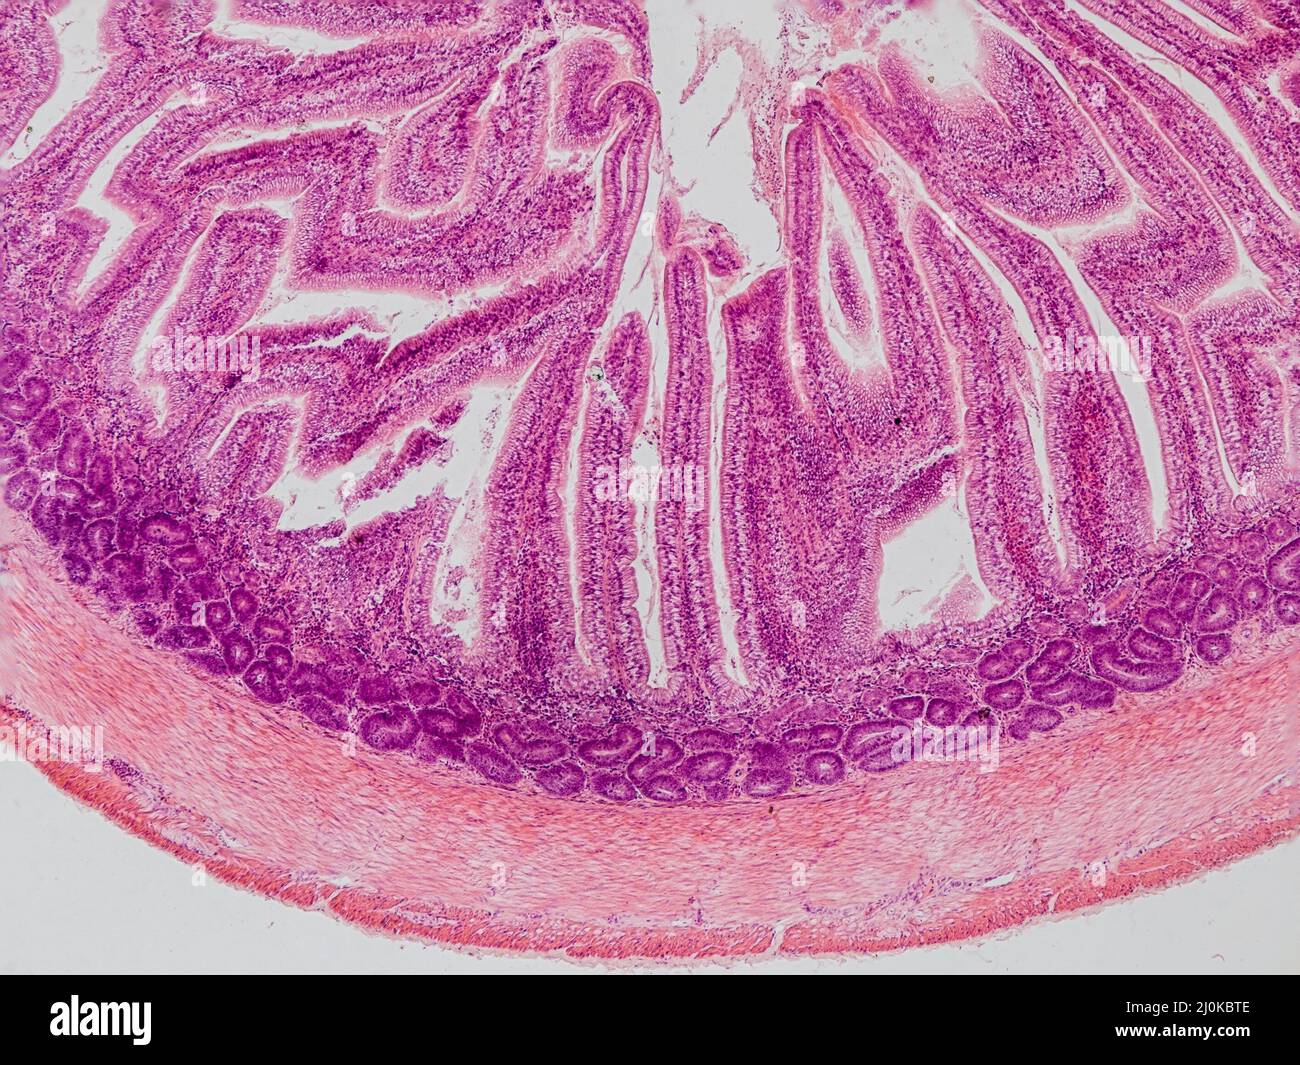 blackbird intestine cross section under the microscope showing intestinal glands and simple columnar epithelium - optical microscope x100 magnificatio Stock Photo